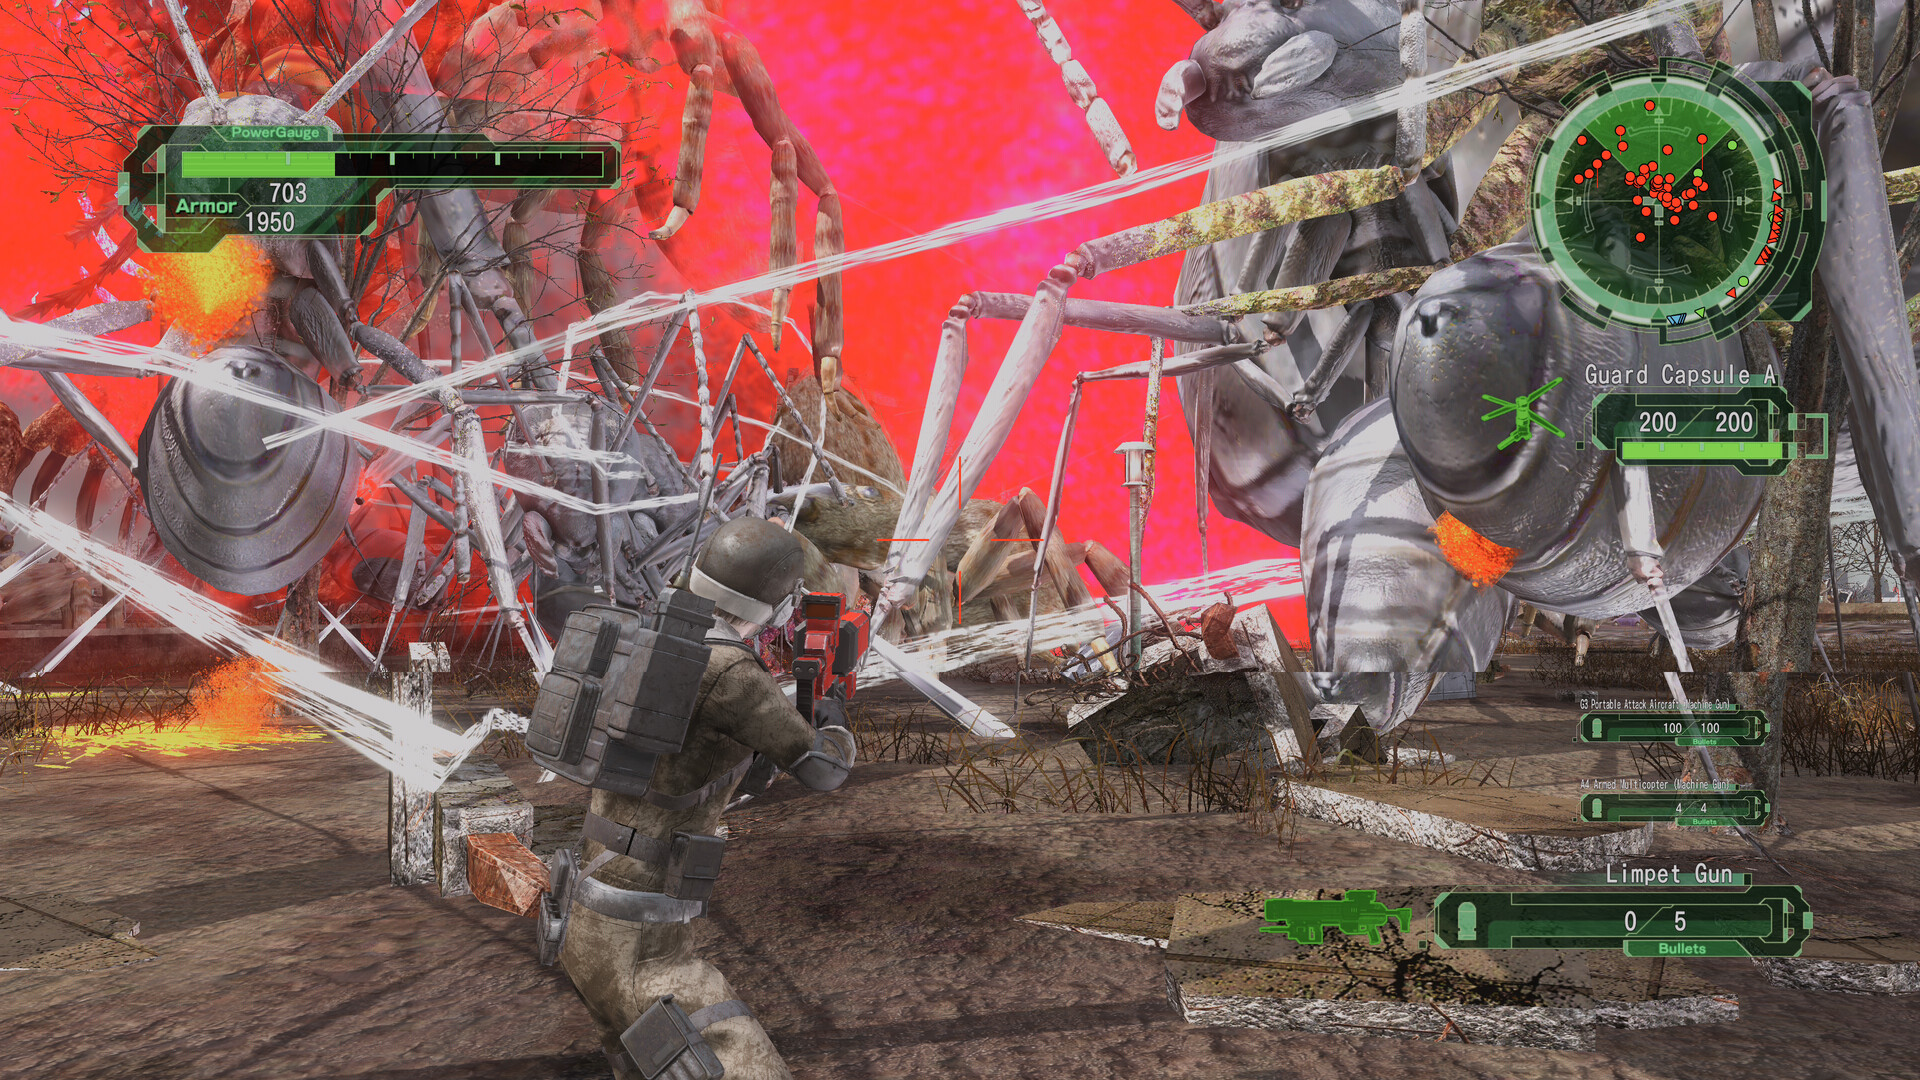 EARTH DEFENSE FORCE 6 Free Download